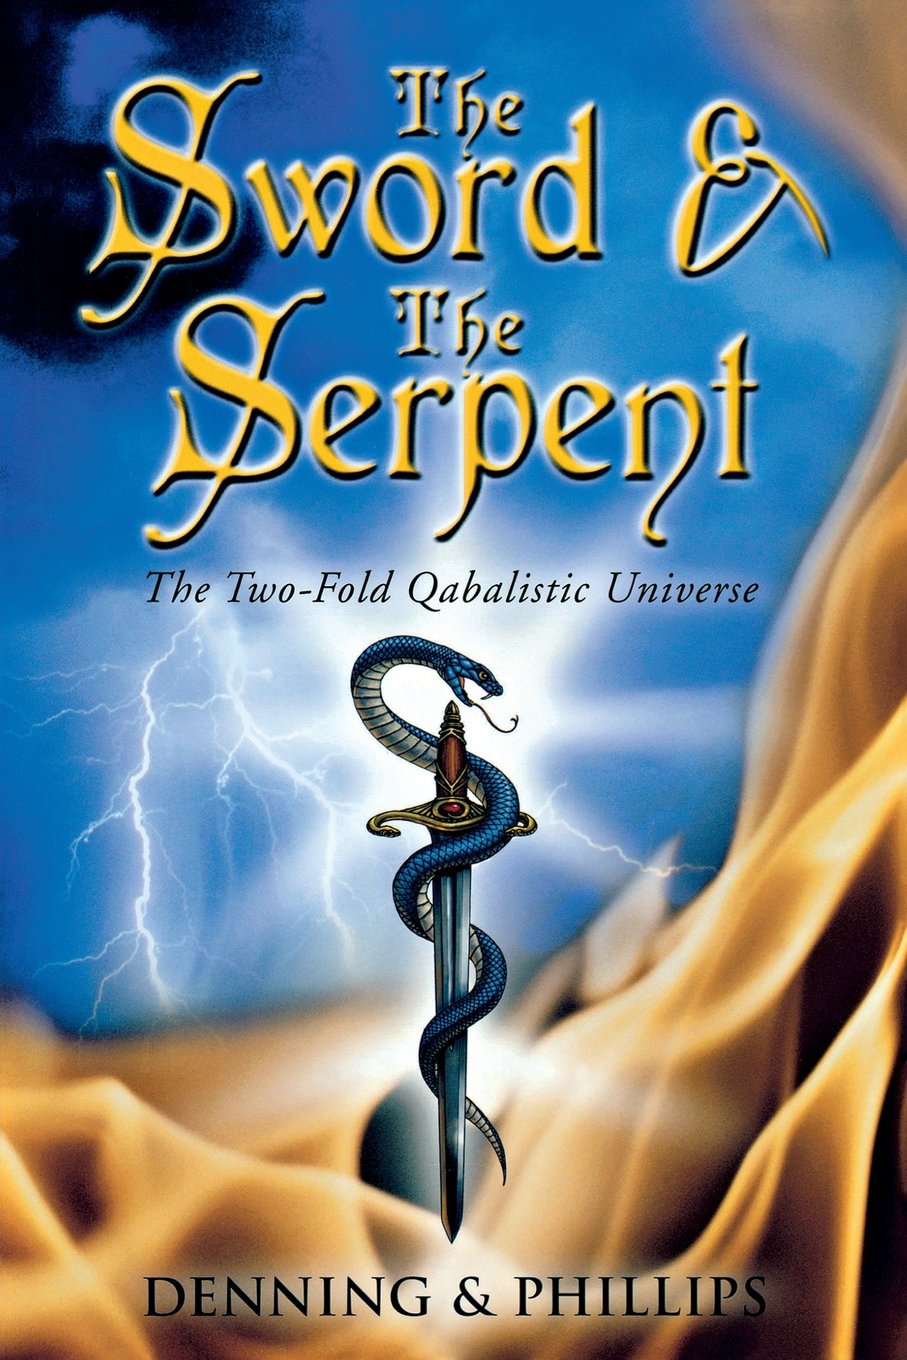 The Sword &amp; the Serpent: The Two-Fold Qabalistic Universe